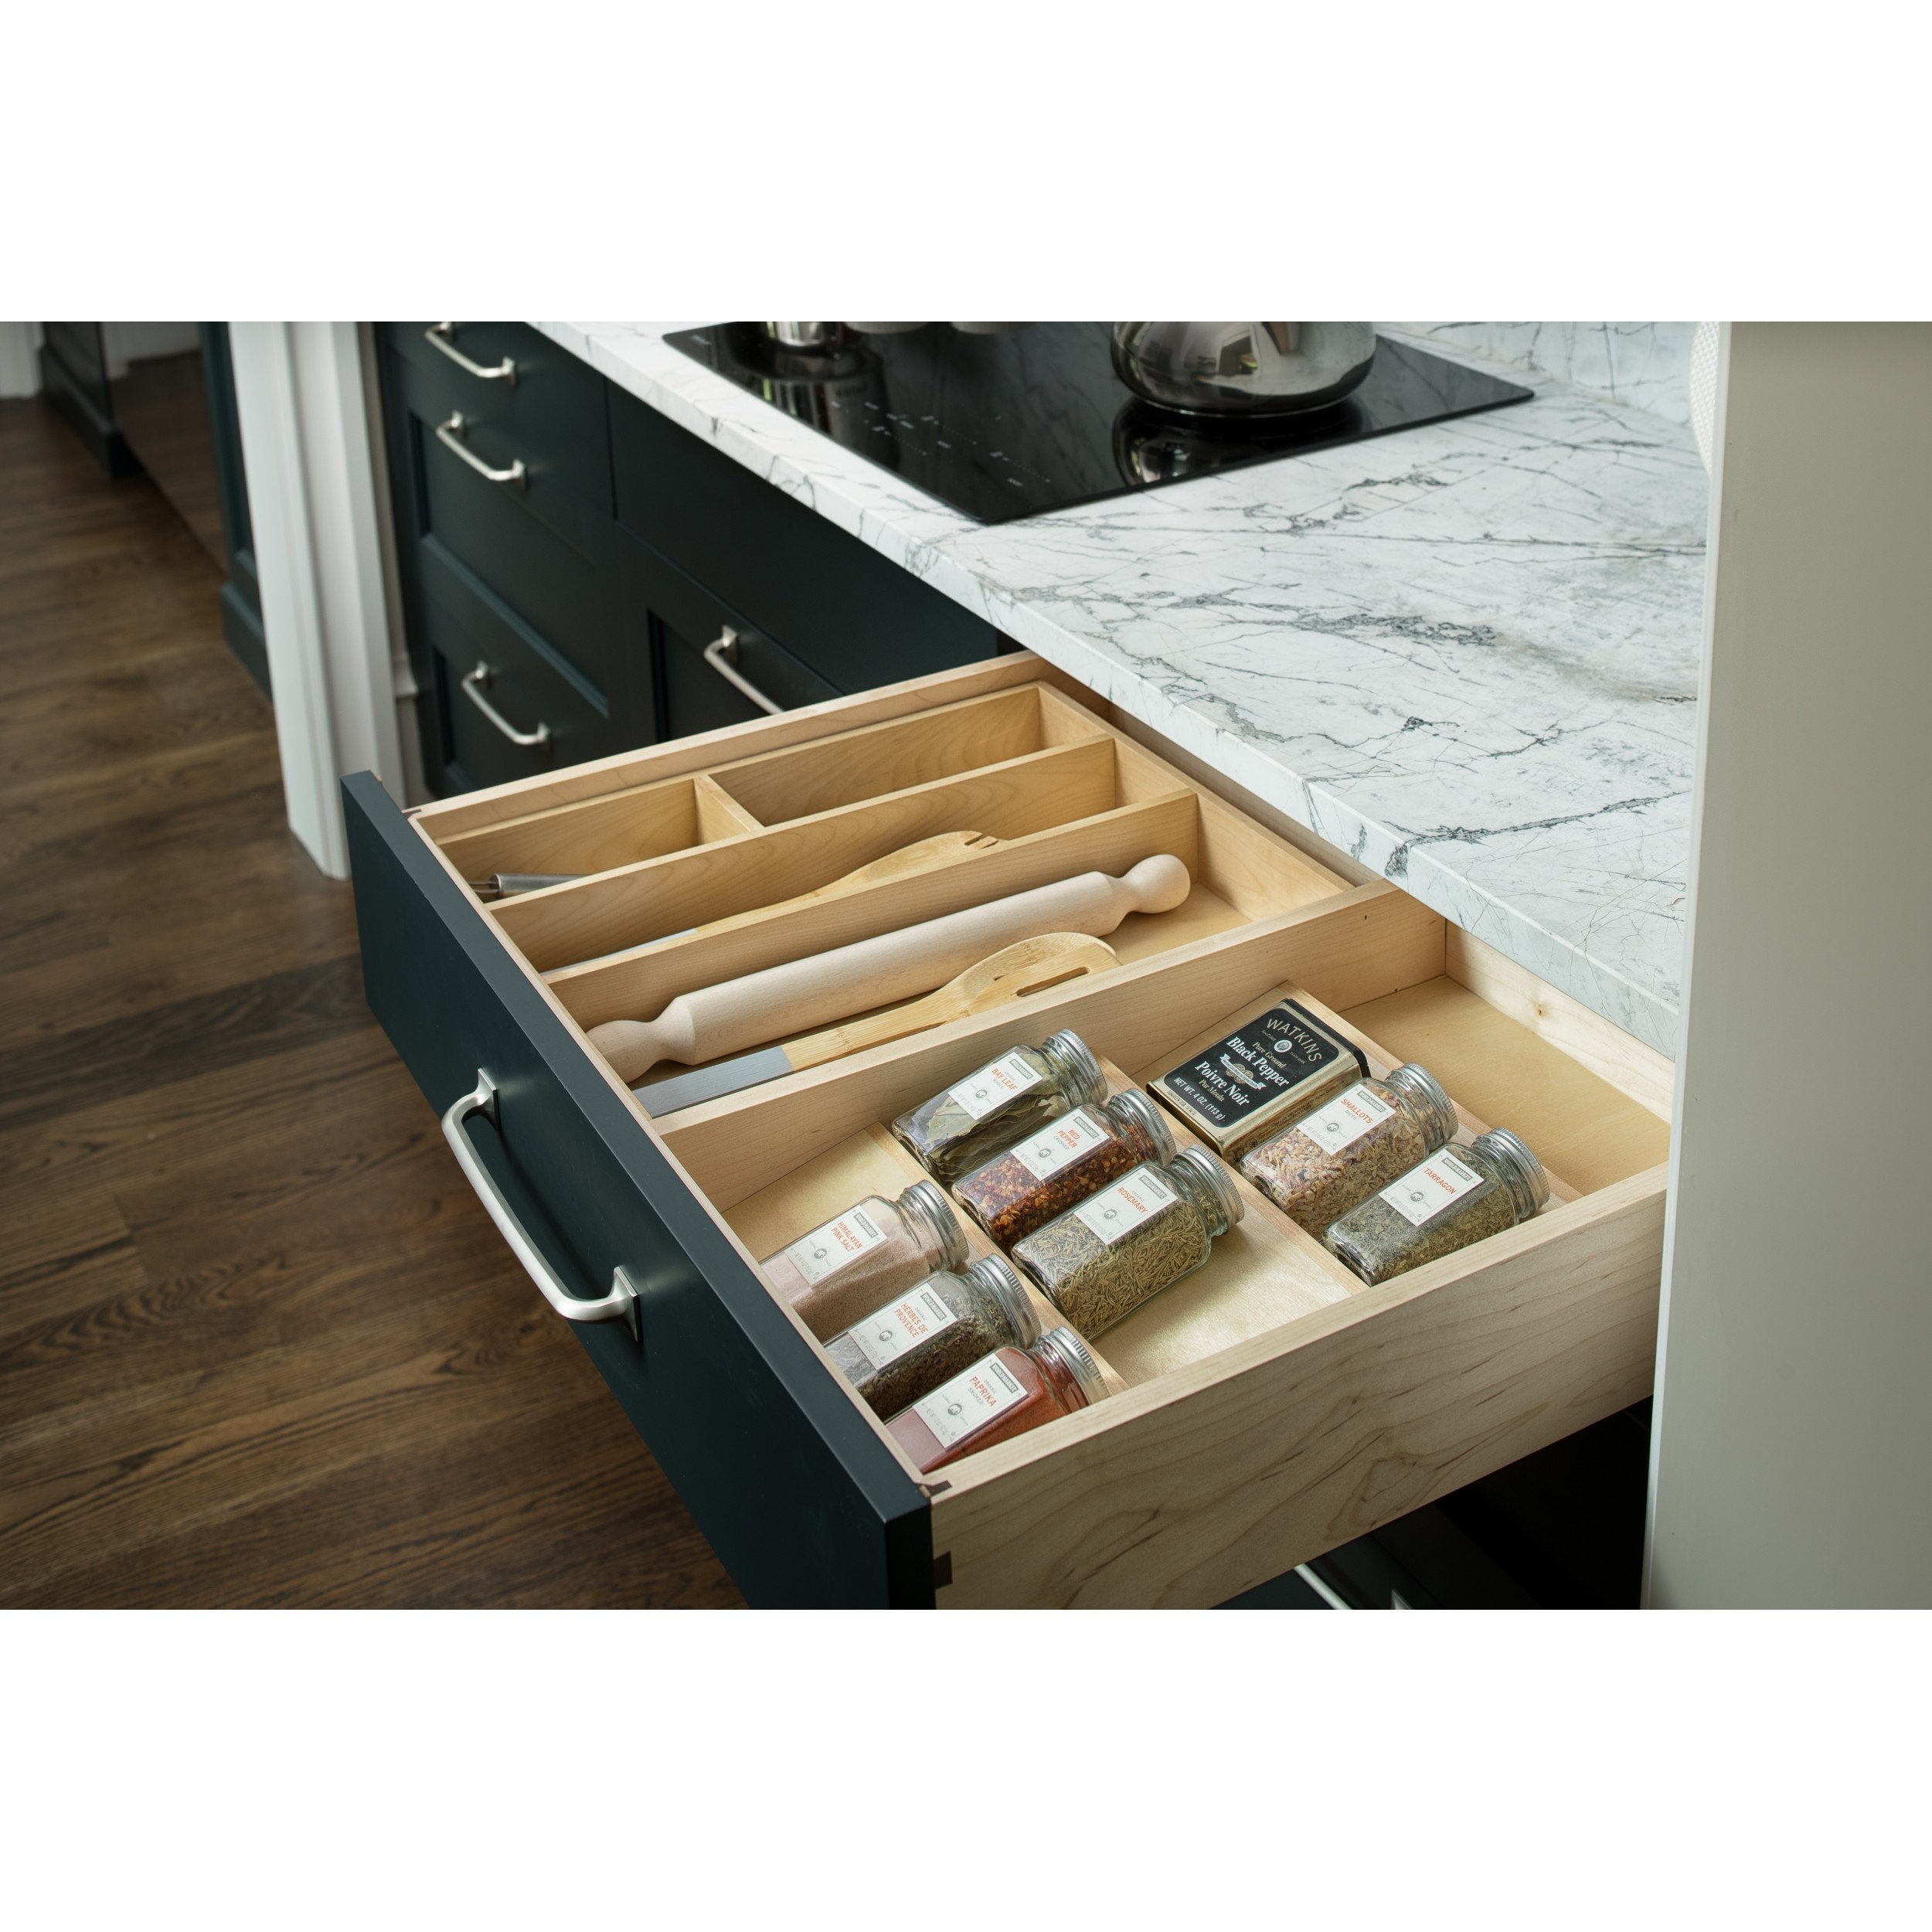 Rev-A-Shelf - 4WD-22-1 - Tall Wood Divider for Drawer Organizers